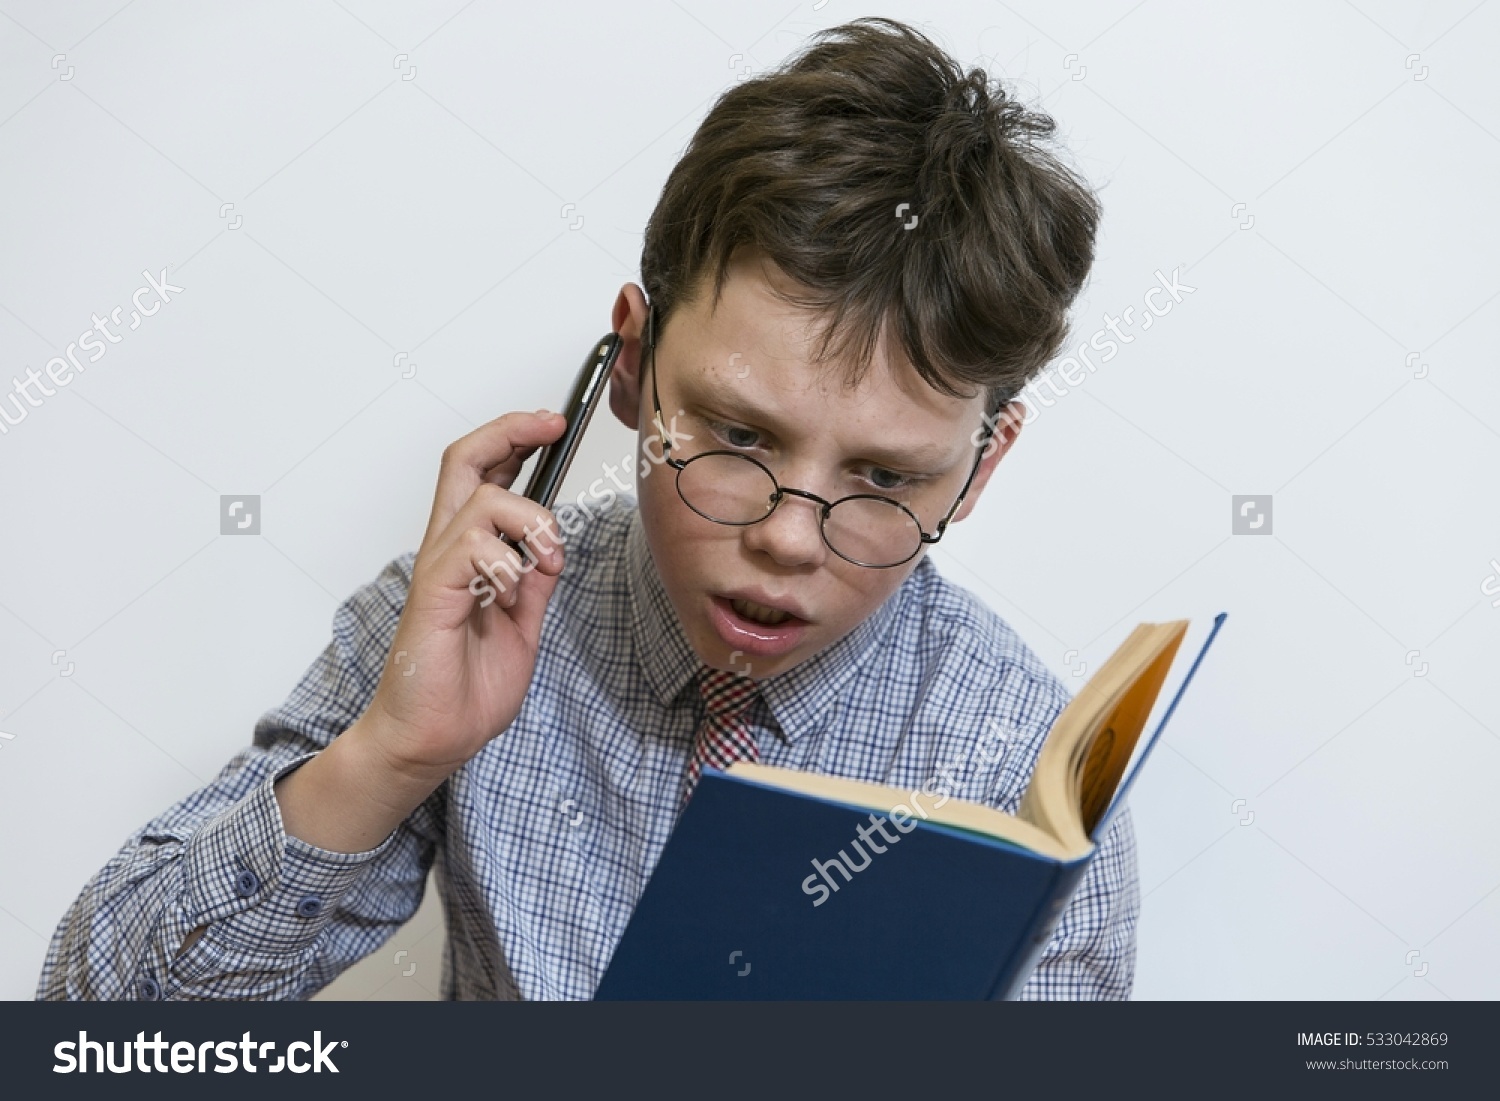 stock-photo-a-high-school-student-with-a-book-on-a-dedicated-white-background-533042869